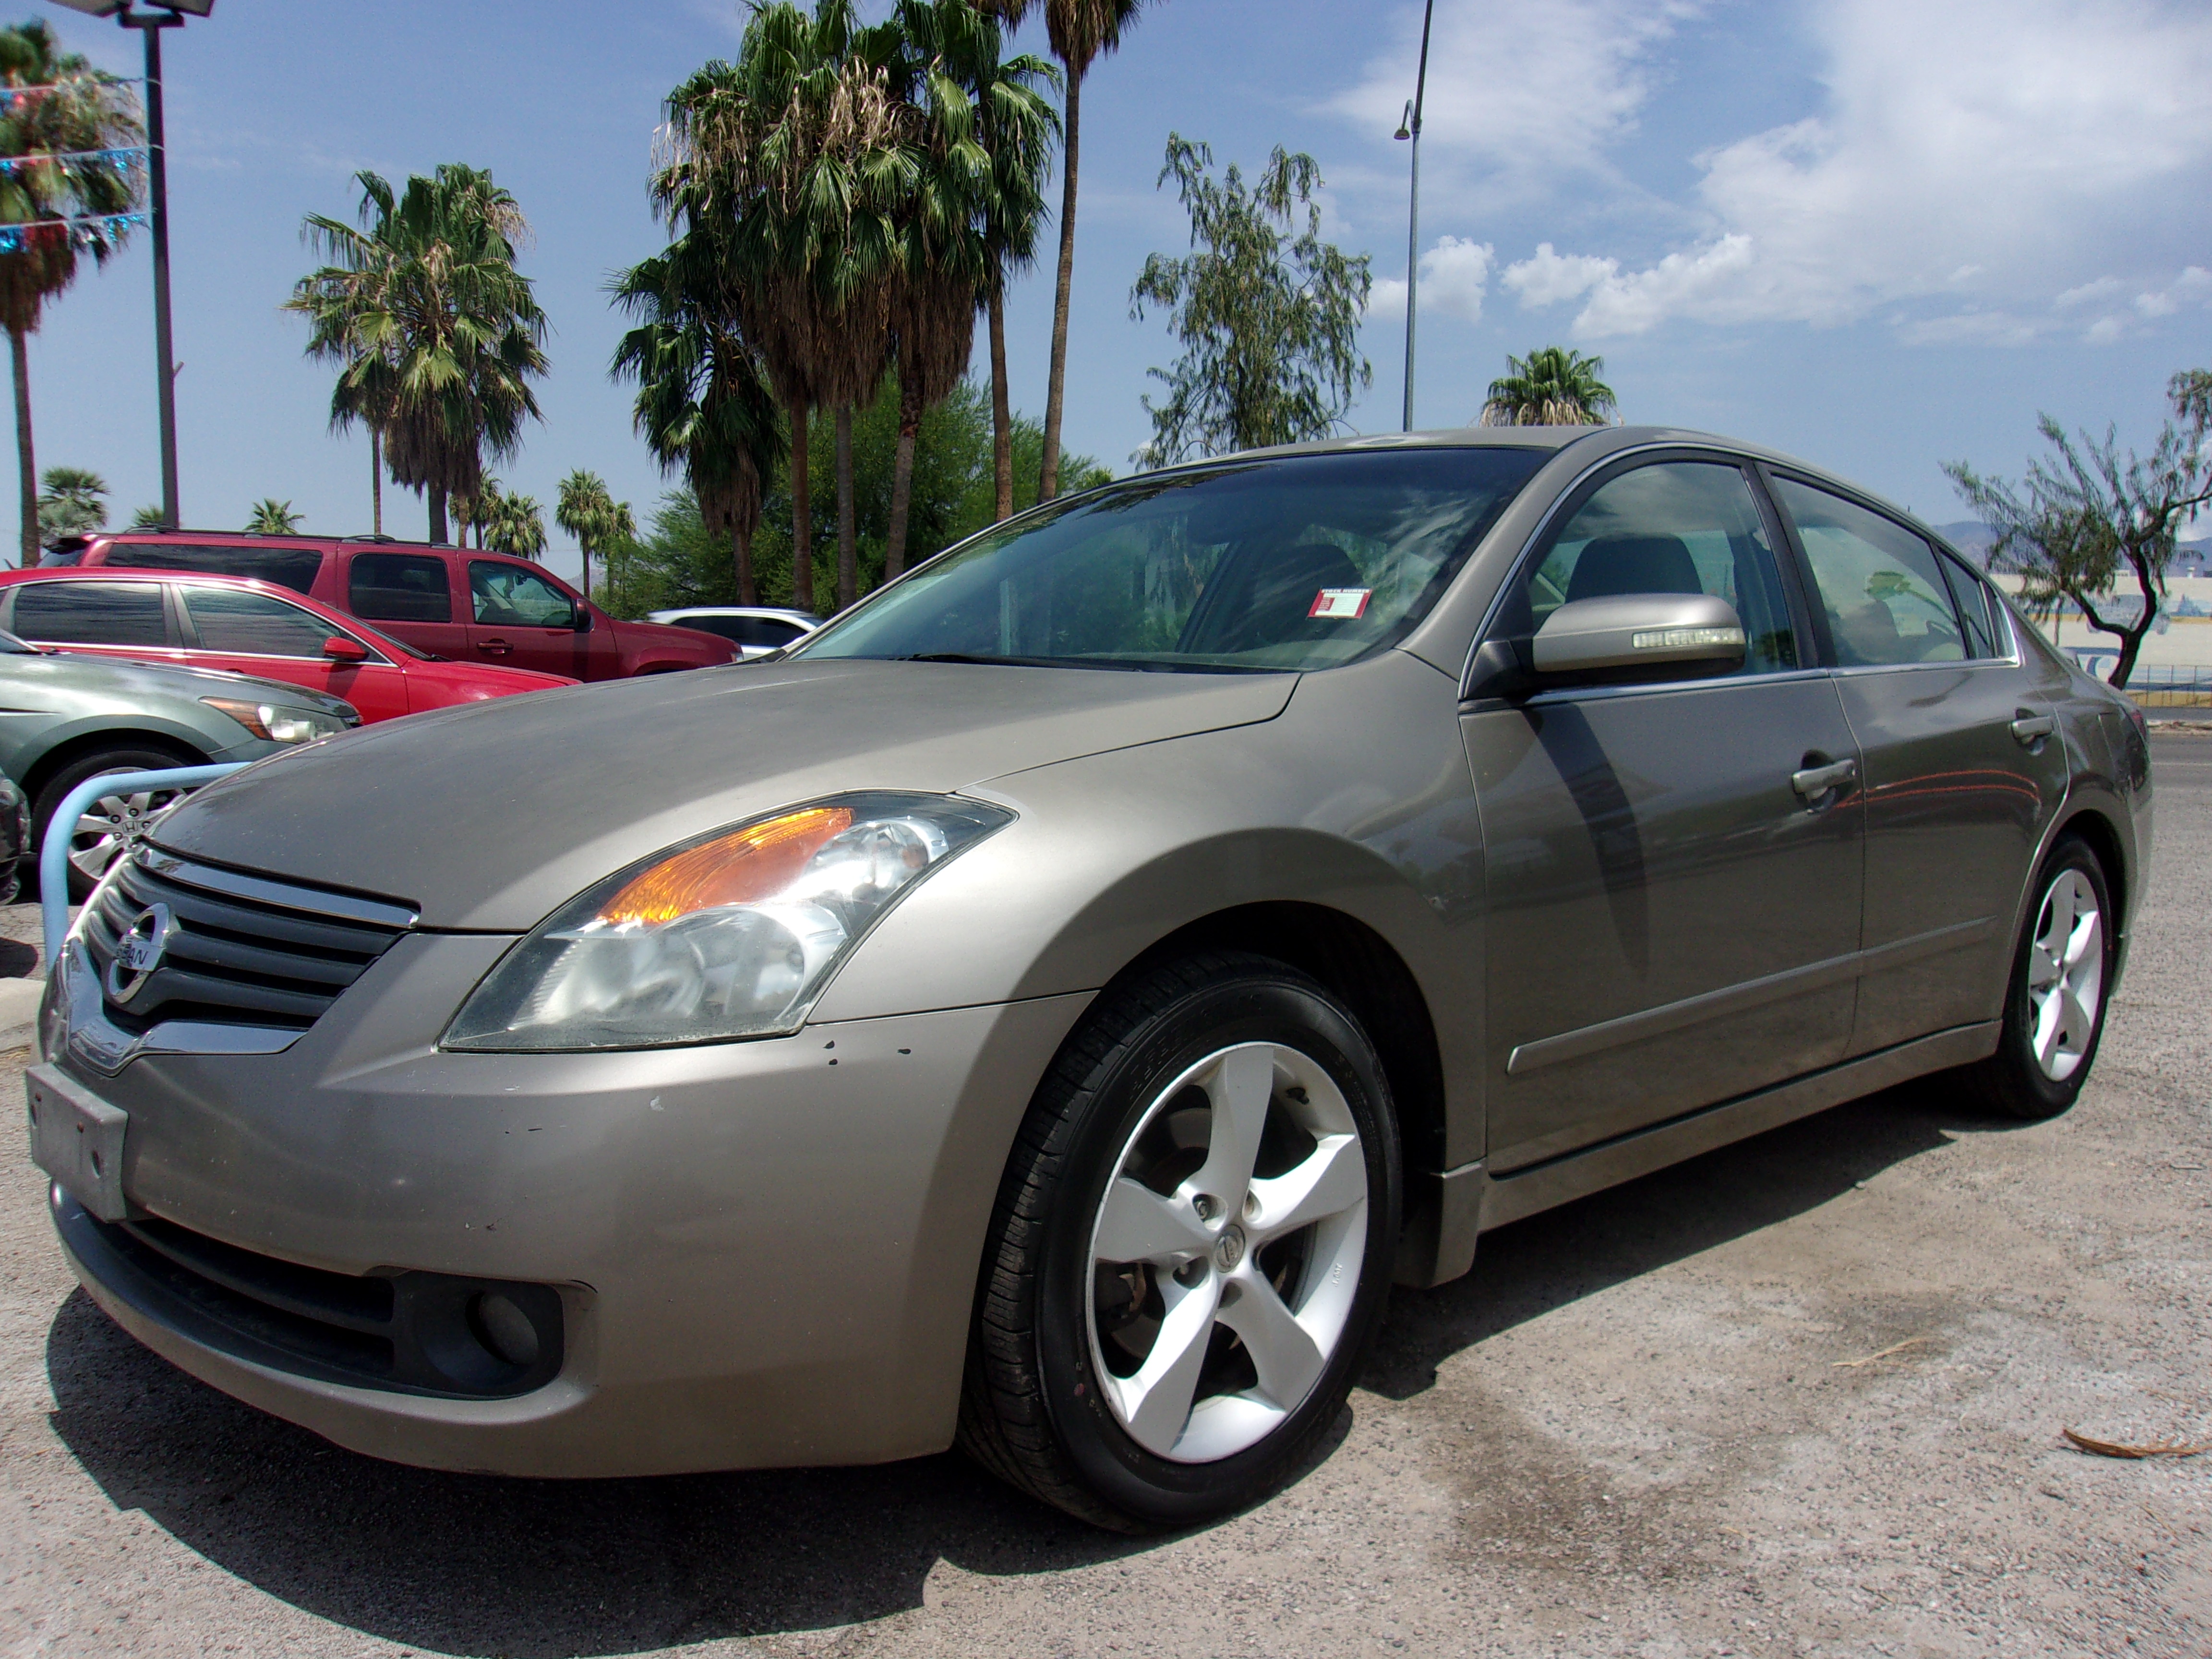 PreOwned 2007 NISSAN ALTIMA 4dr Car in Tucson S7584 Tucson Used Car